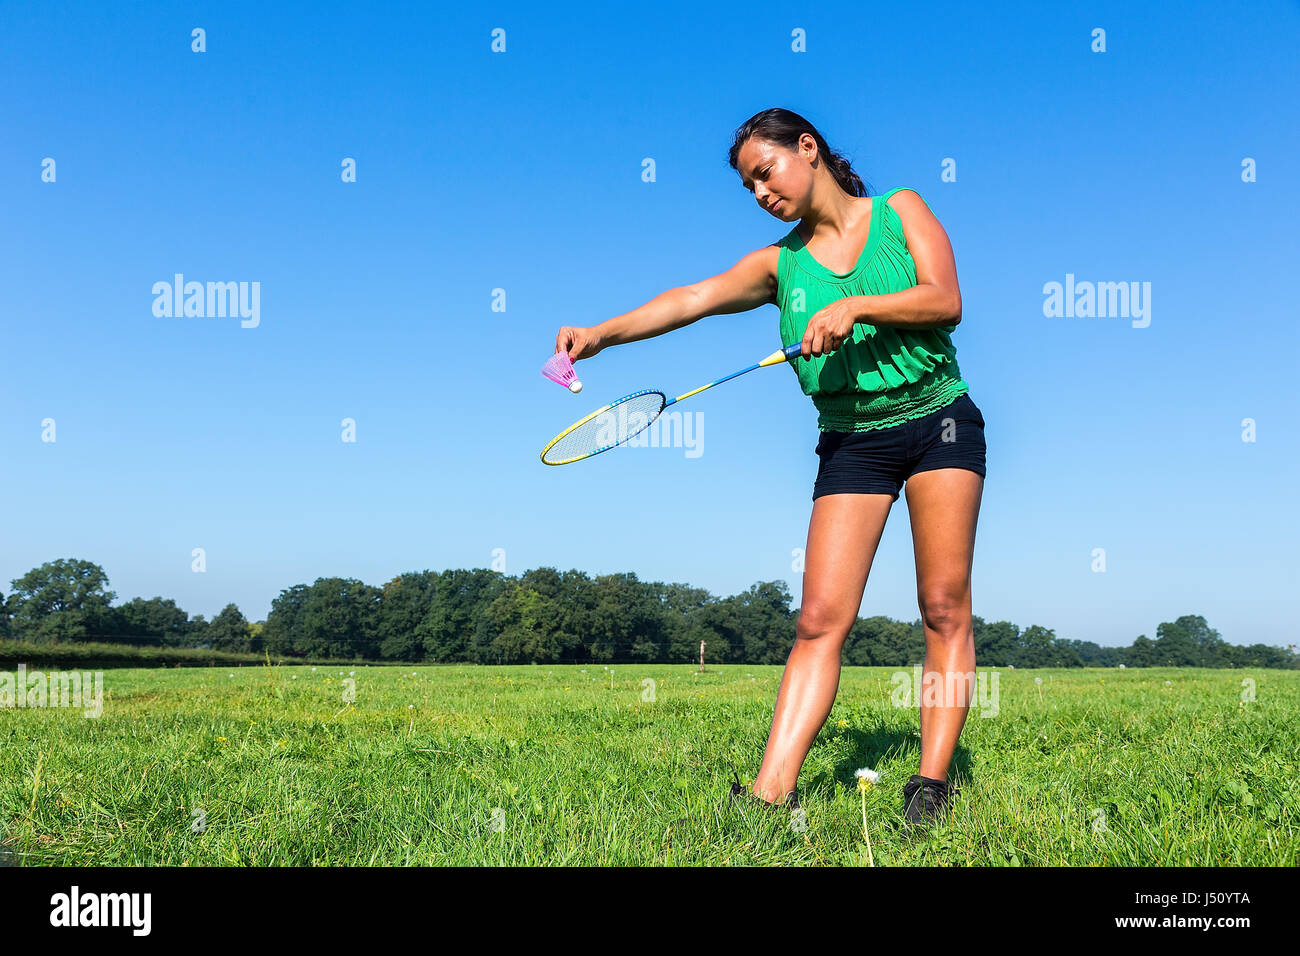 Colombian woman serve with badminton racket and shuttle outside in grass Stock Photo